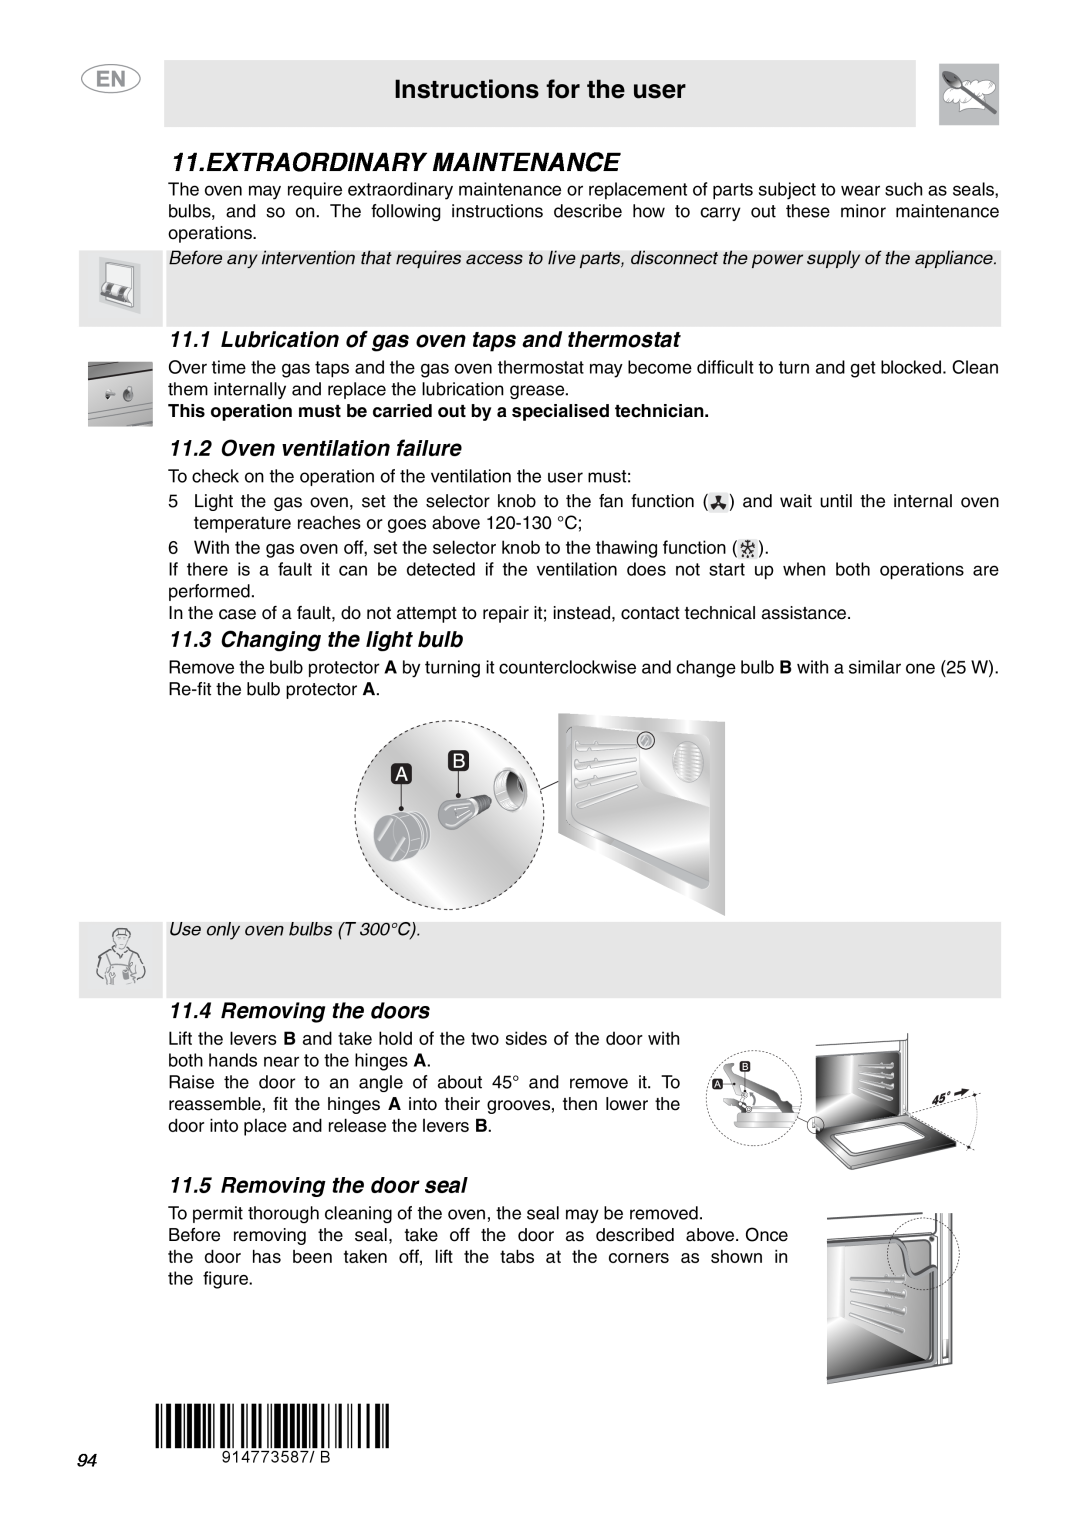 Smeg C6GVXI manual Extraordinary Maintenance, Lubrication of gas oven taps and thermostat, Oven ventilation failure 